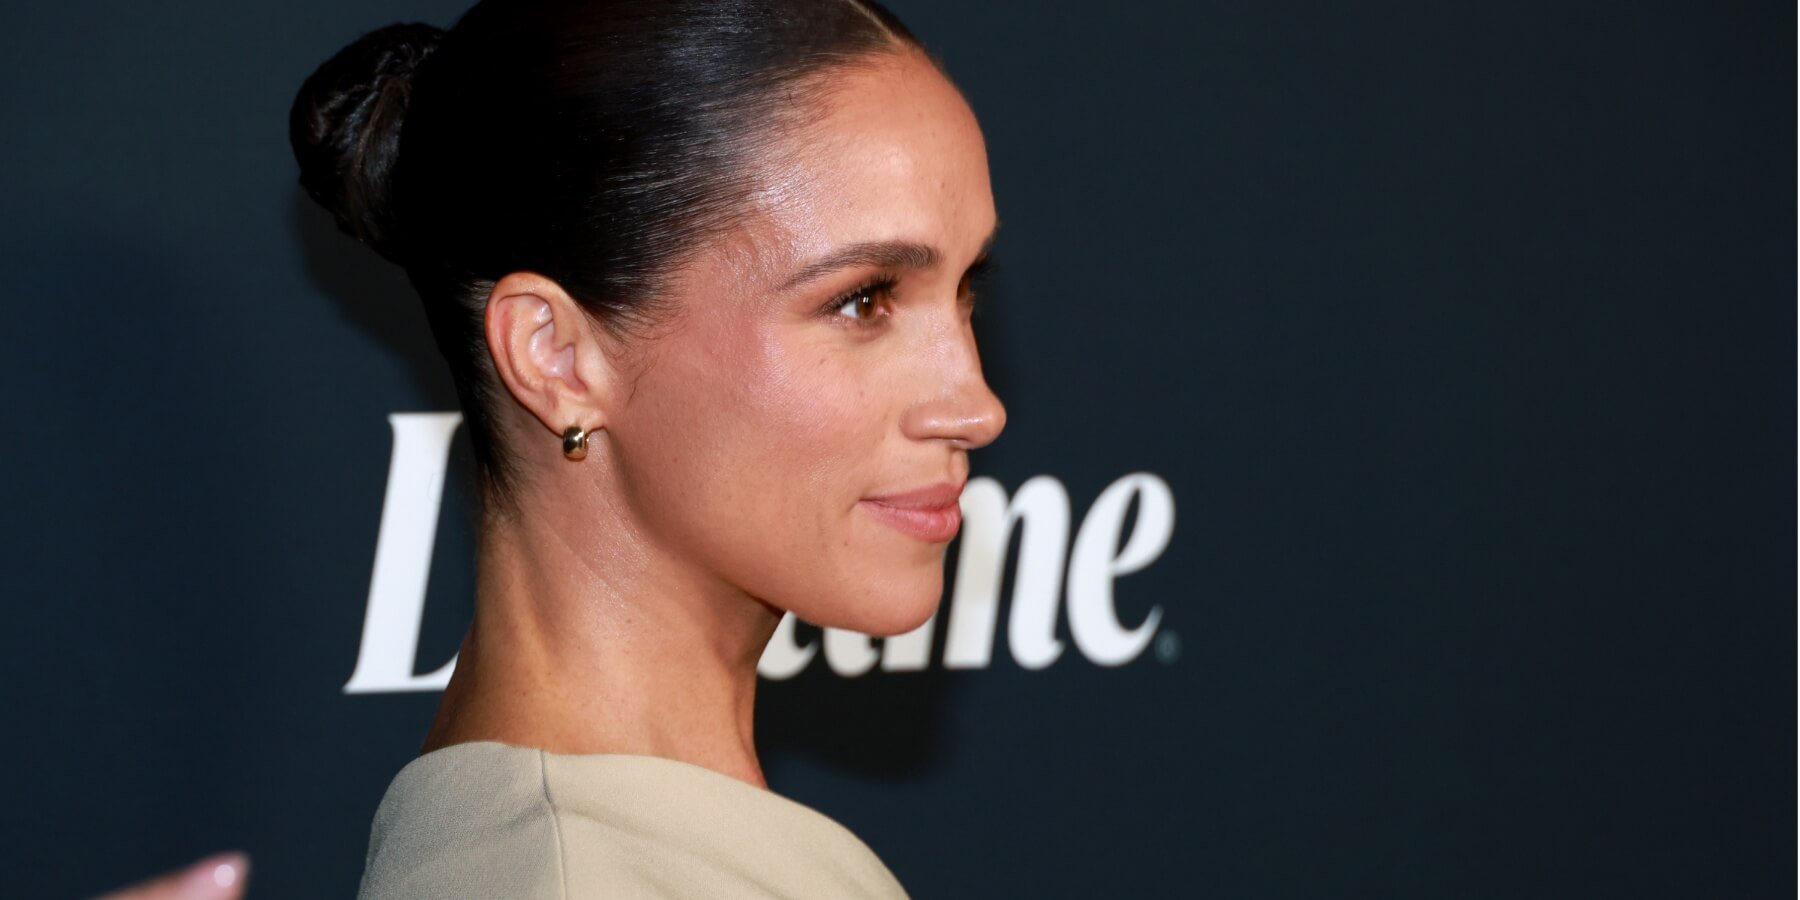 Meghan Markle walks the red carpet, shares surprise about 'Suits' success on Netflix, at Variety event.